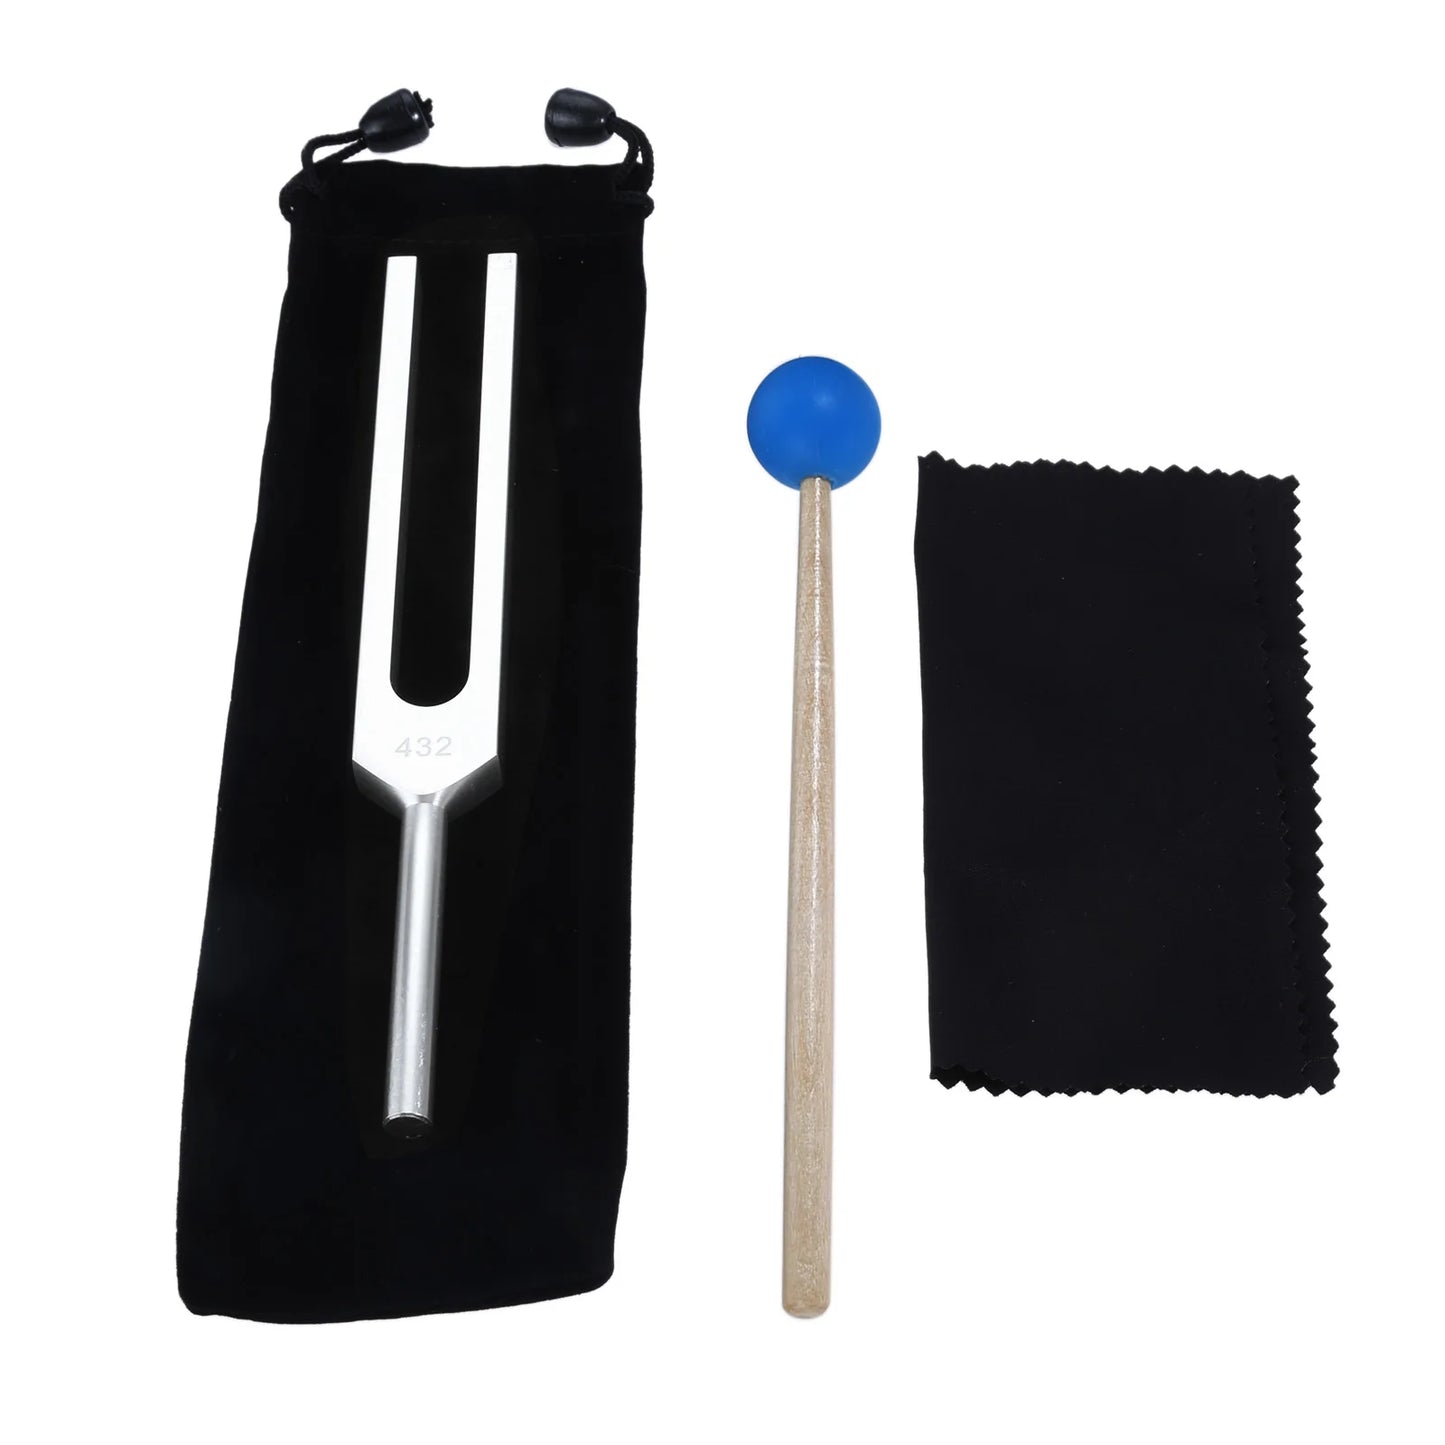 432 Hz Tuning Fork with Silicone Hammer, Bag, Cleaning Cloth - Cosmic Serenity Shop